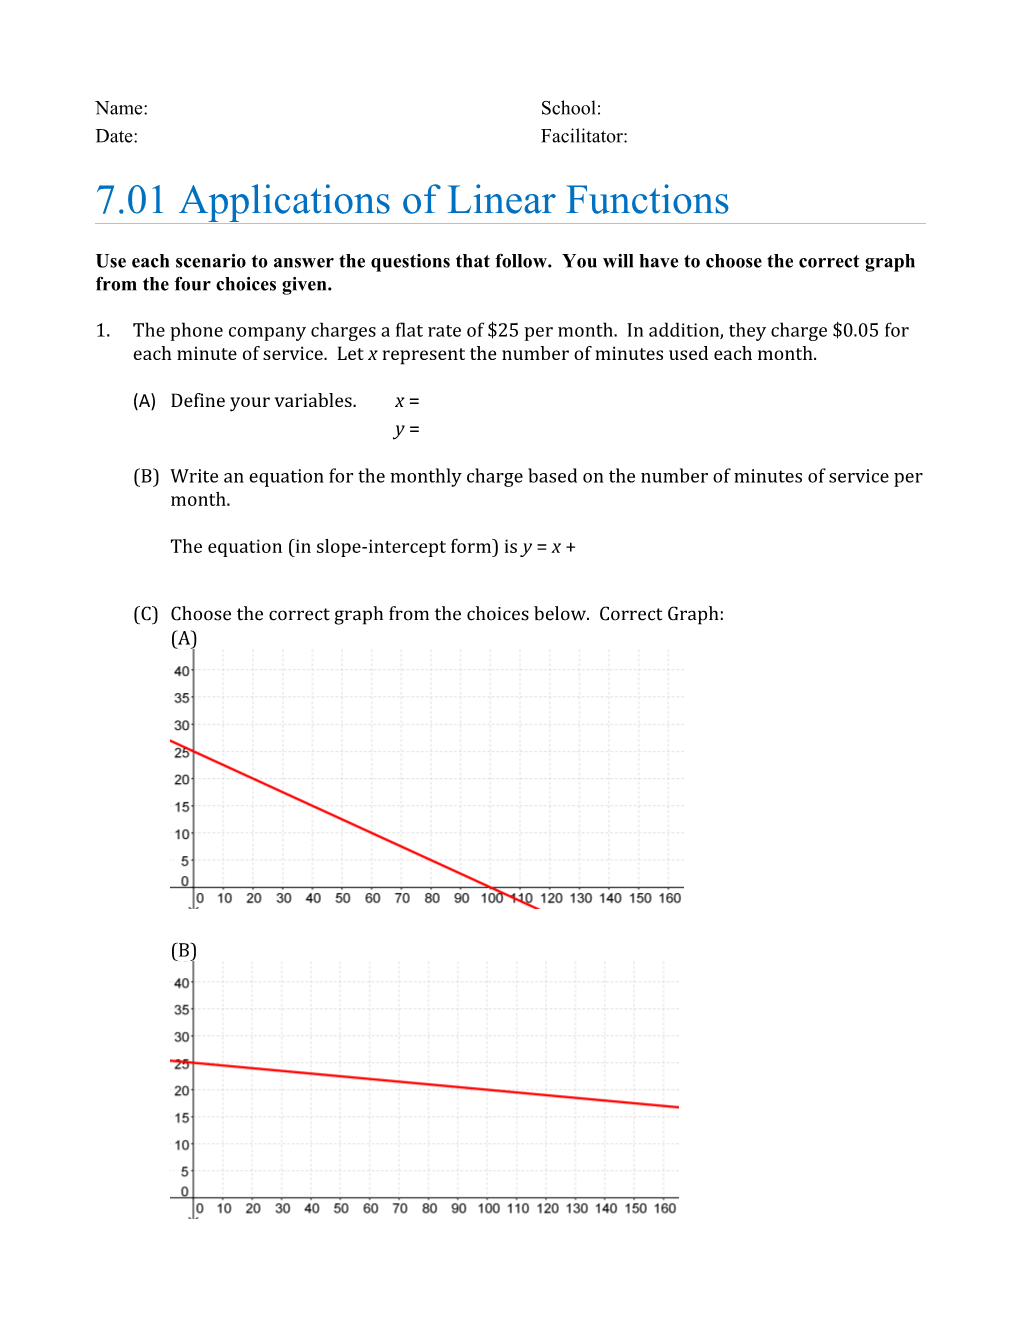 7.01Applications of Linear Functions